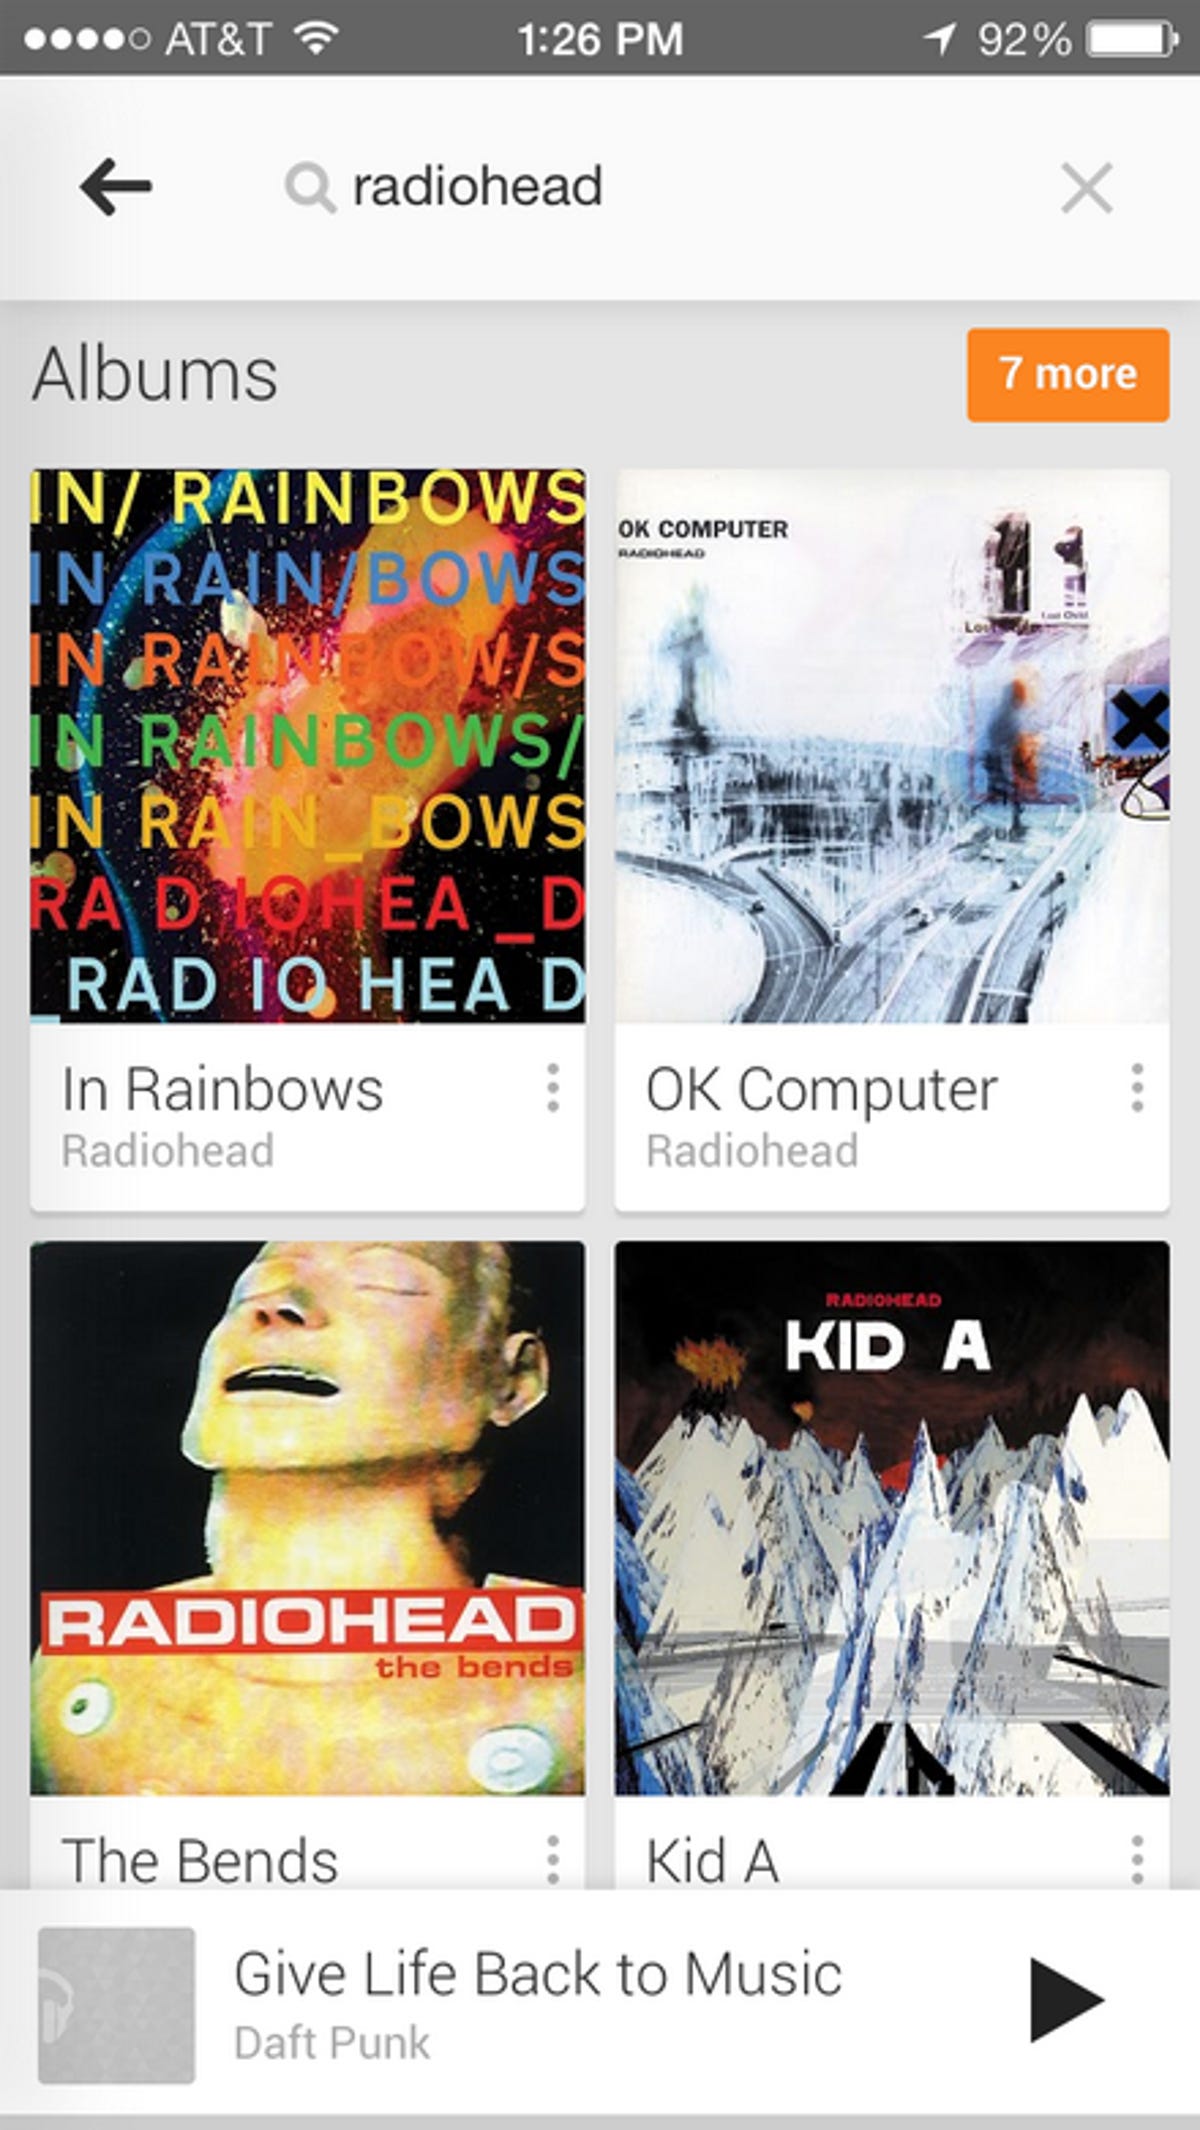 AlbumCoverBrowse.png